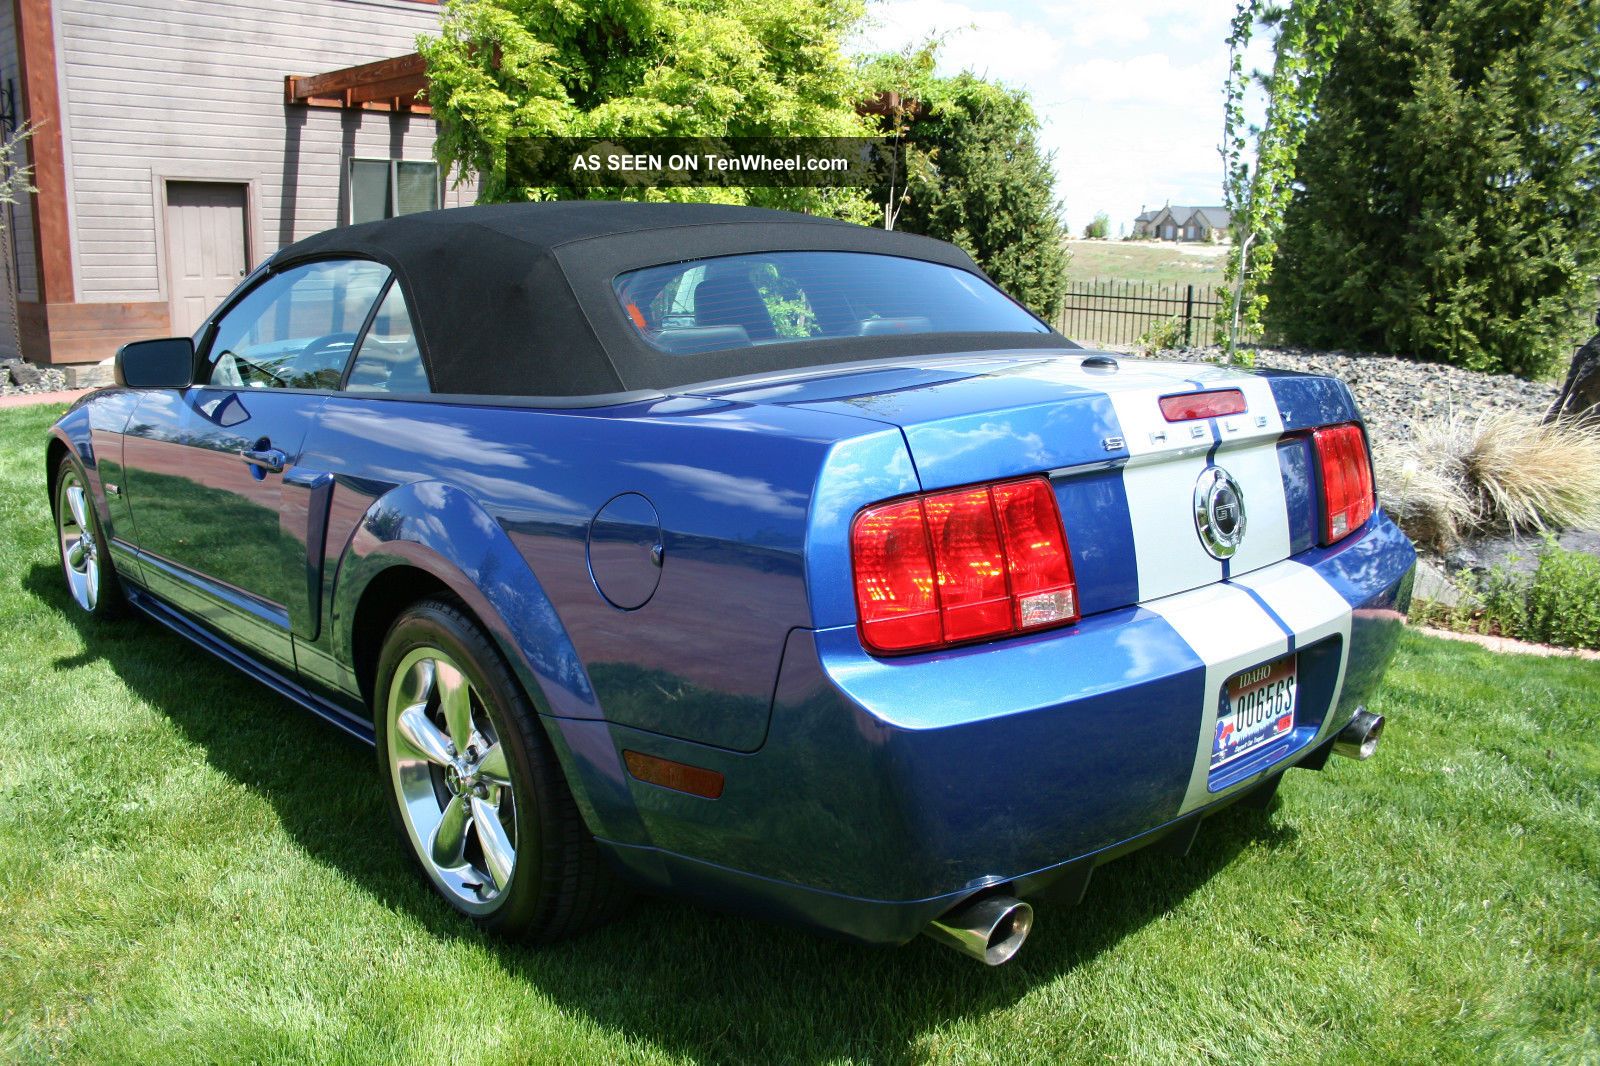 2008 Ford Shelby Gt Convertible Supercharged